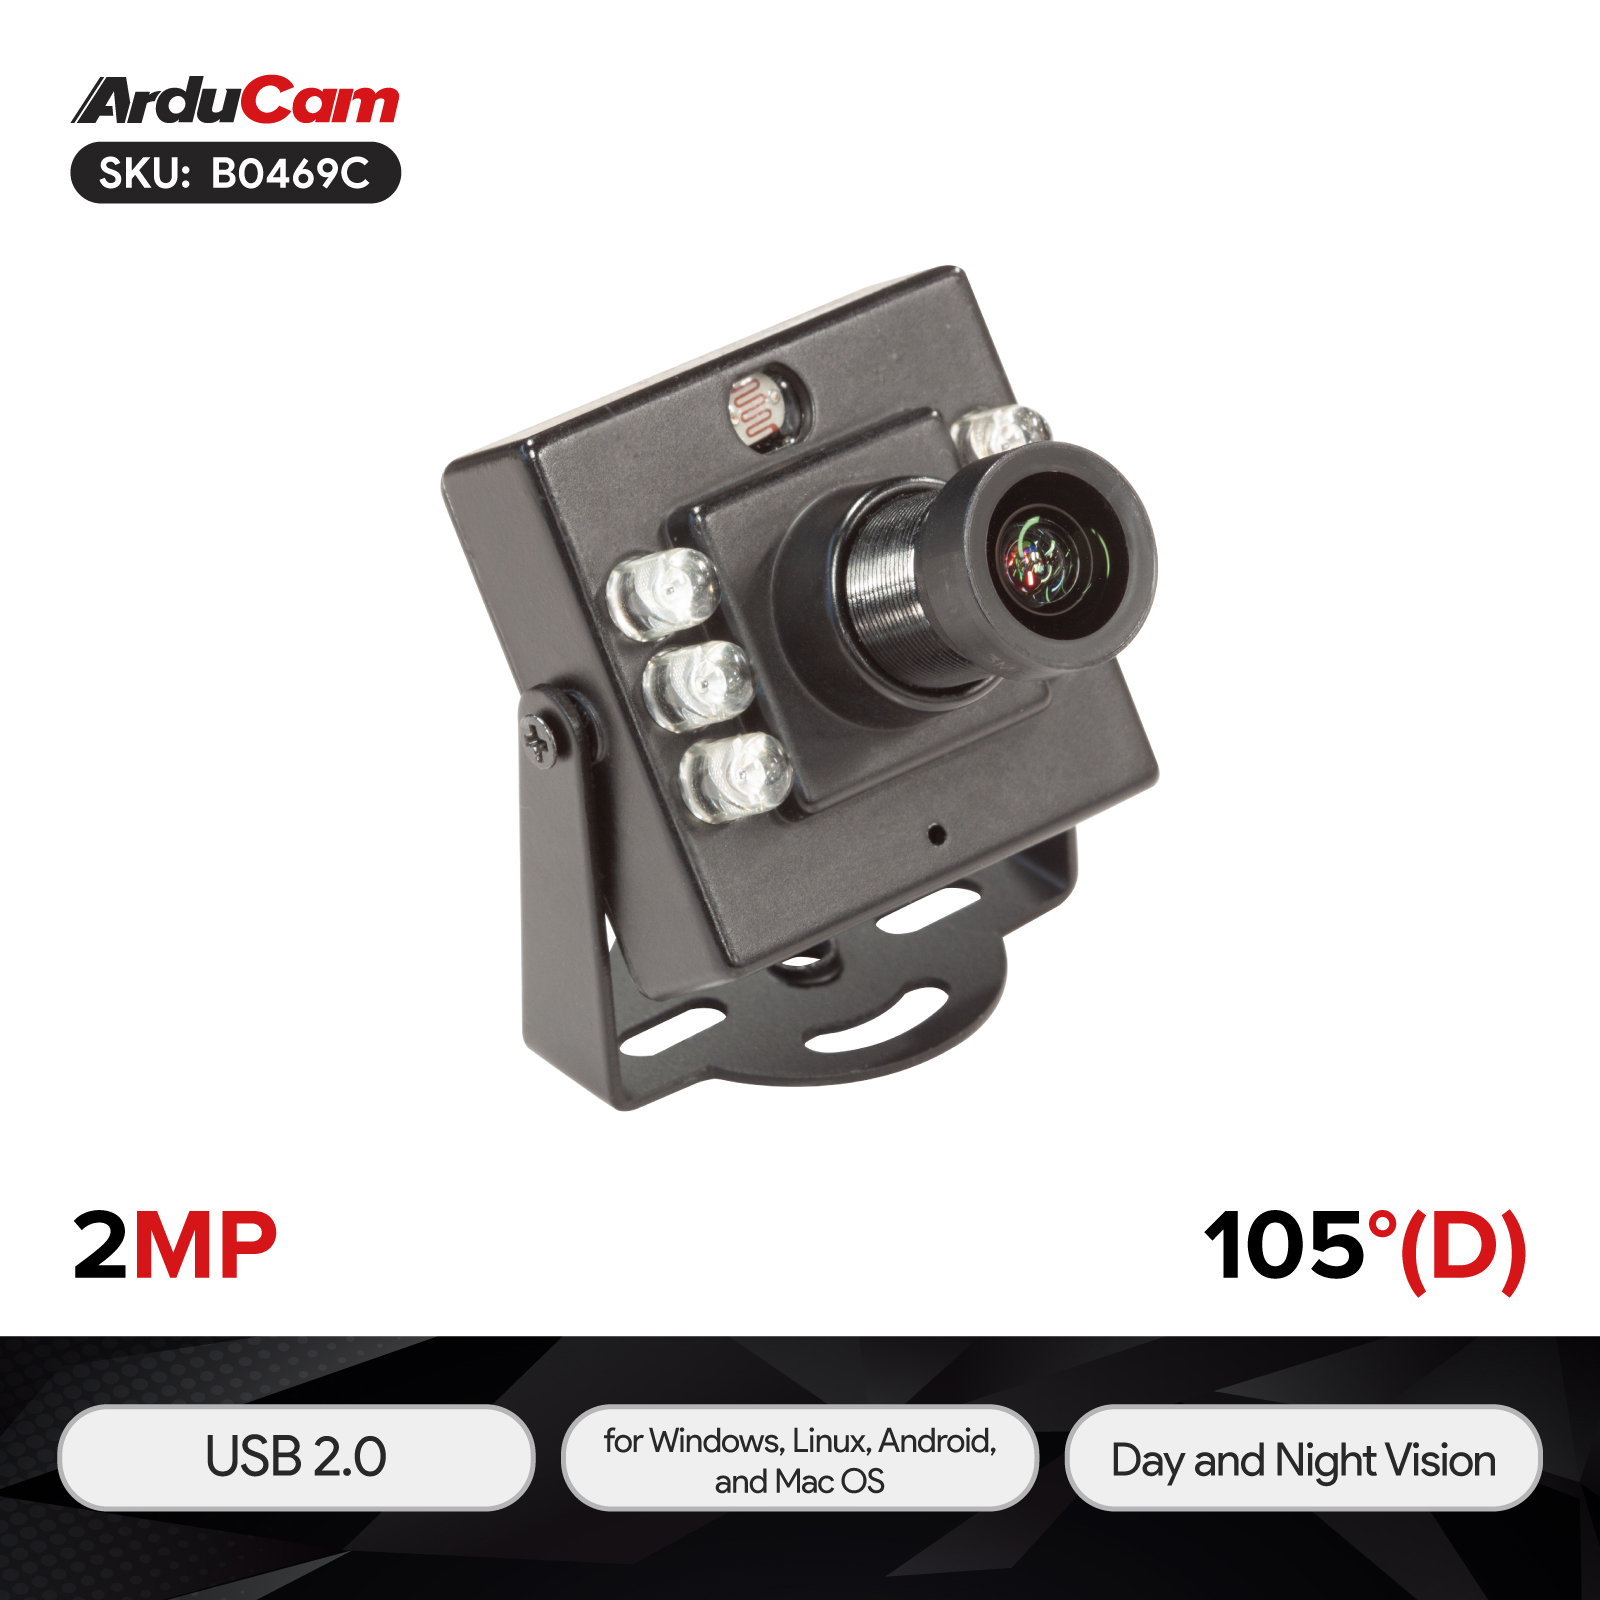  Arducam 1080P Day & Night Vision USB Camera for